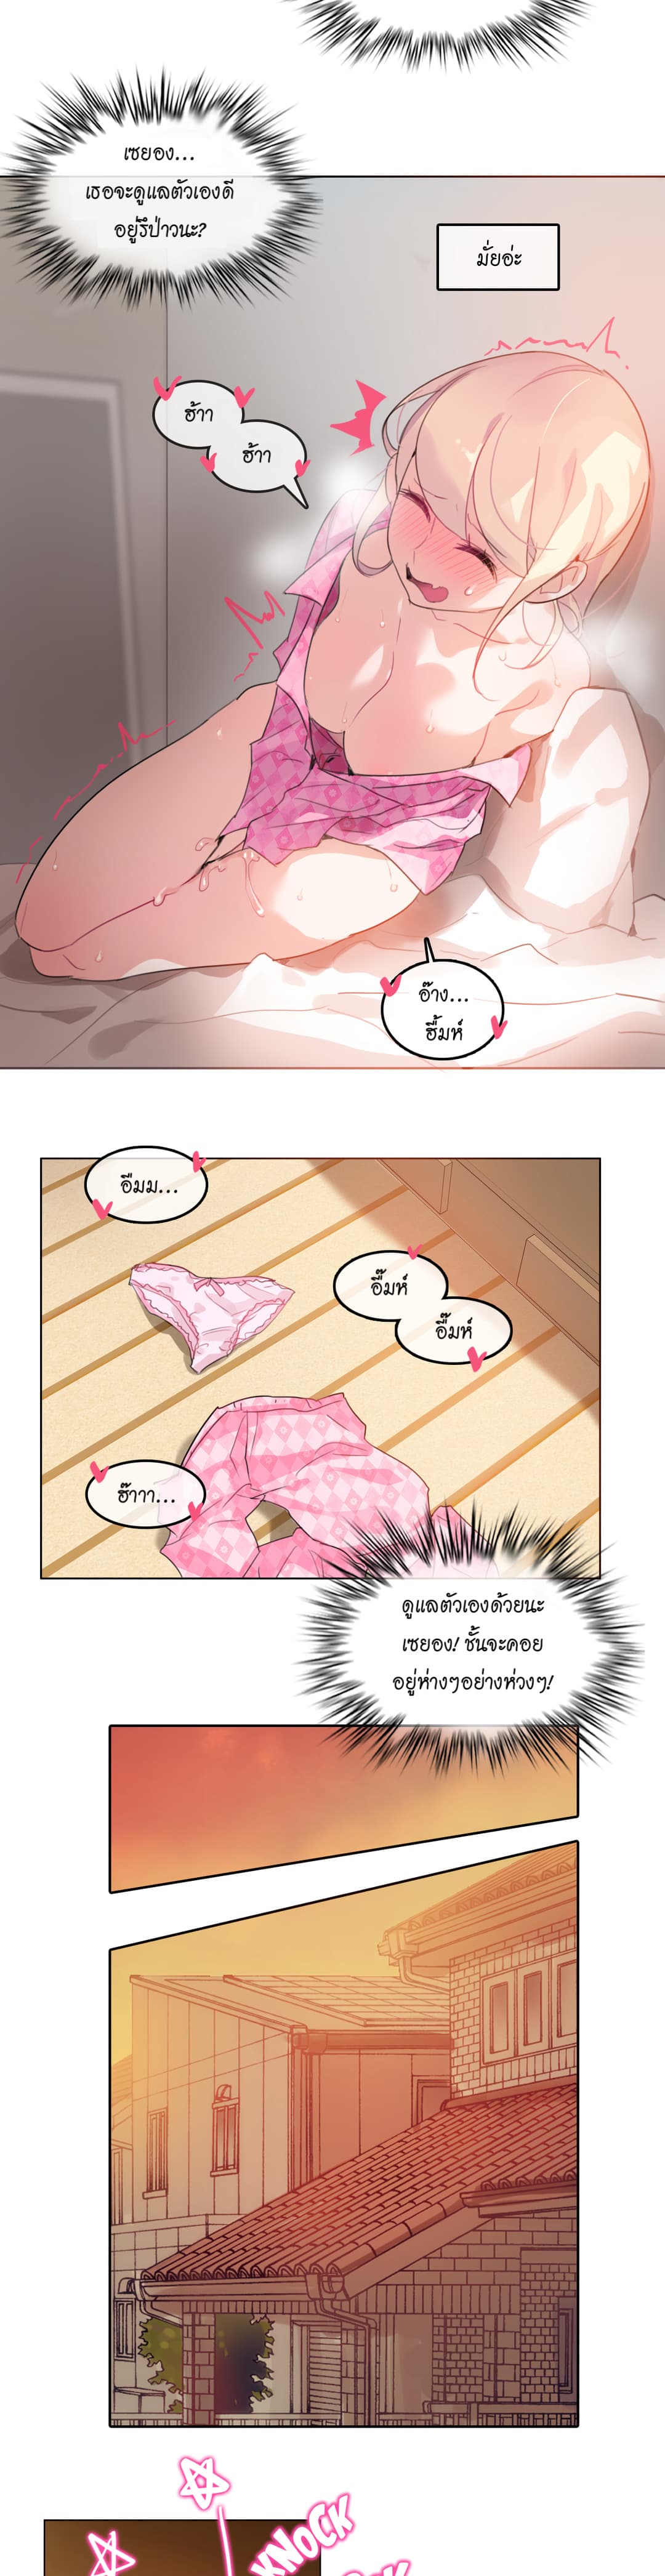 A Pervert’s Daily Life 15 (10)